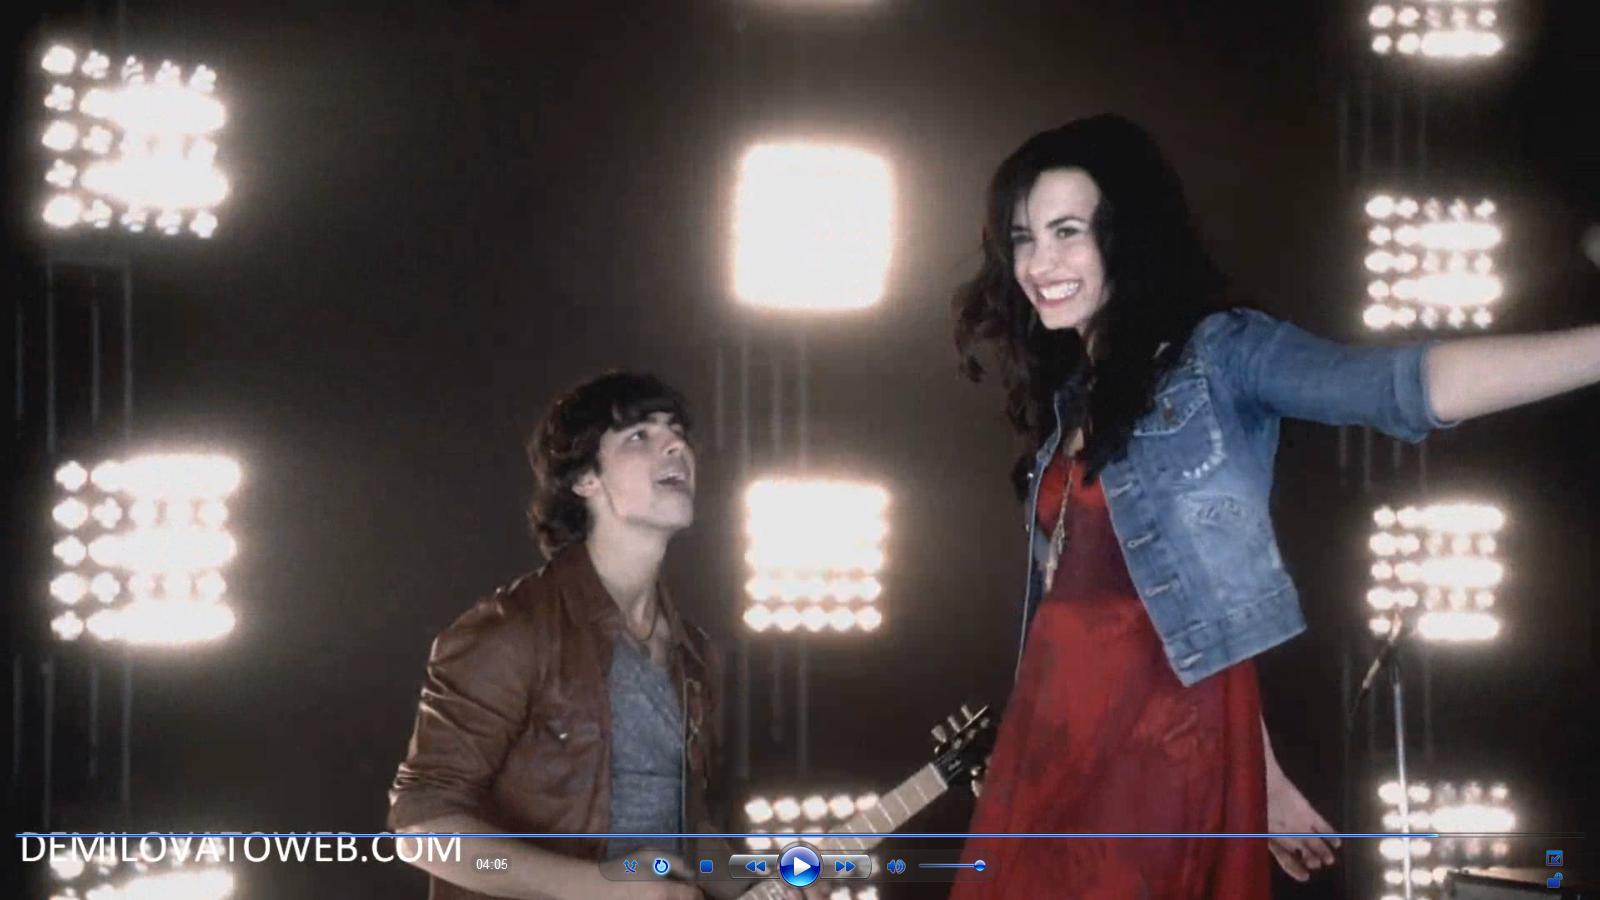 for Jemi news ONLY.